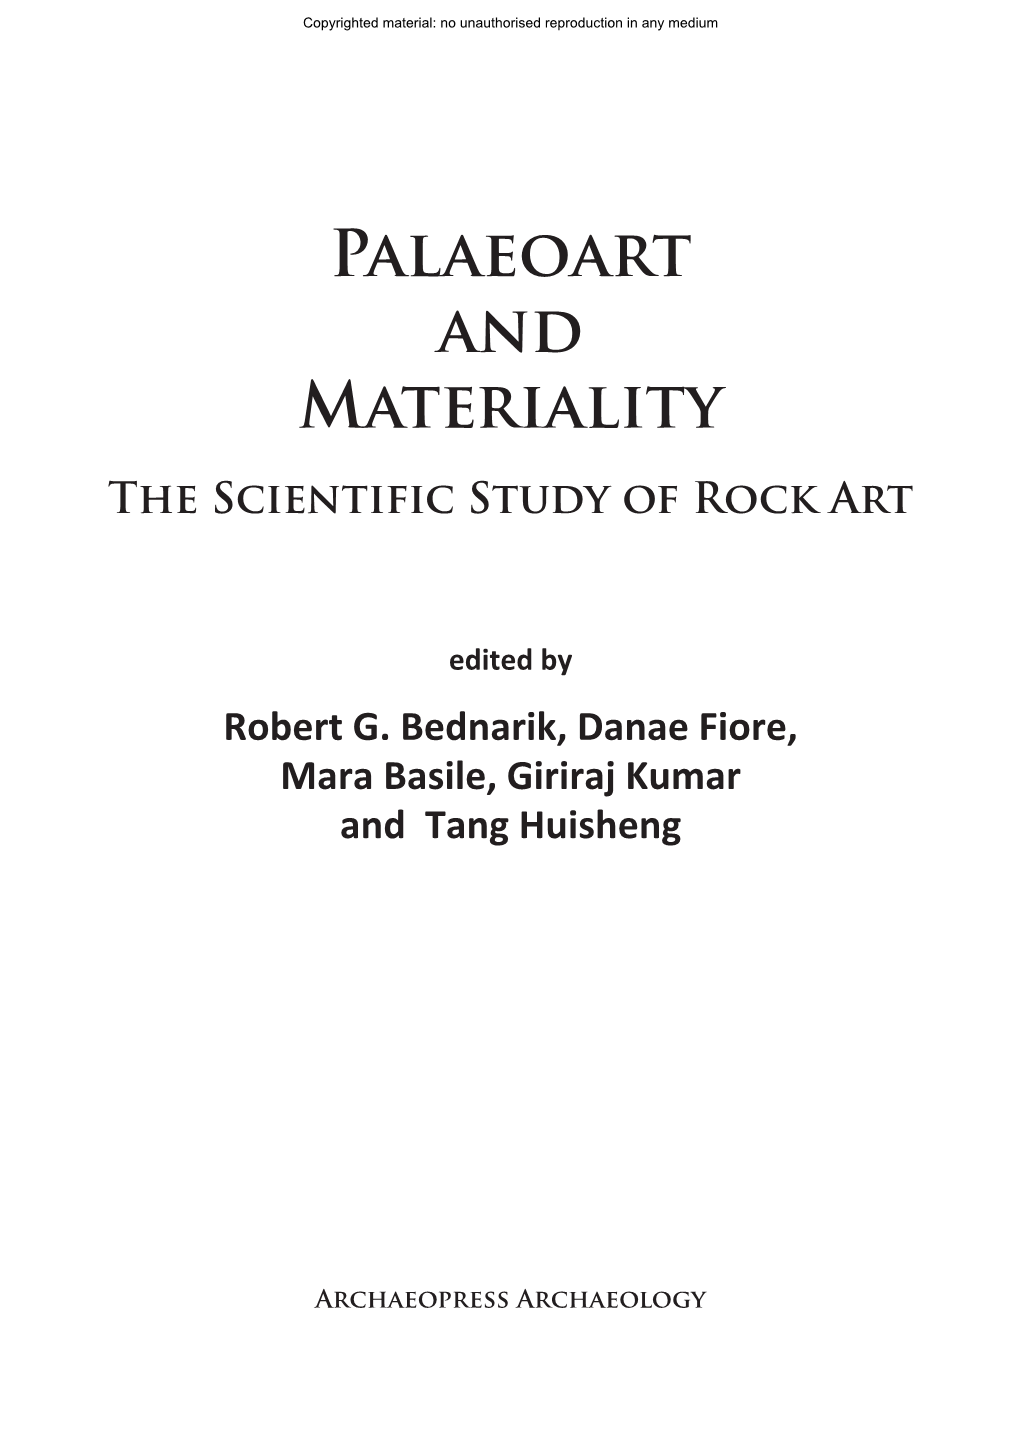 Palaeoart and Materiality the Scientific Study of Rock Art